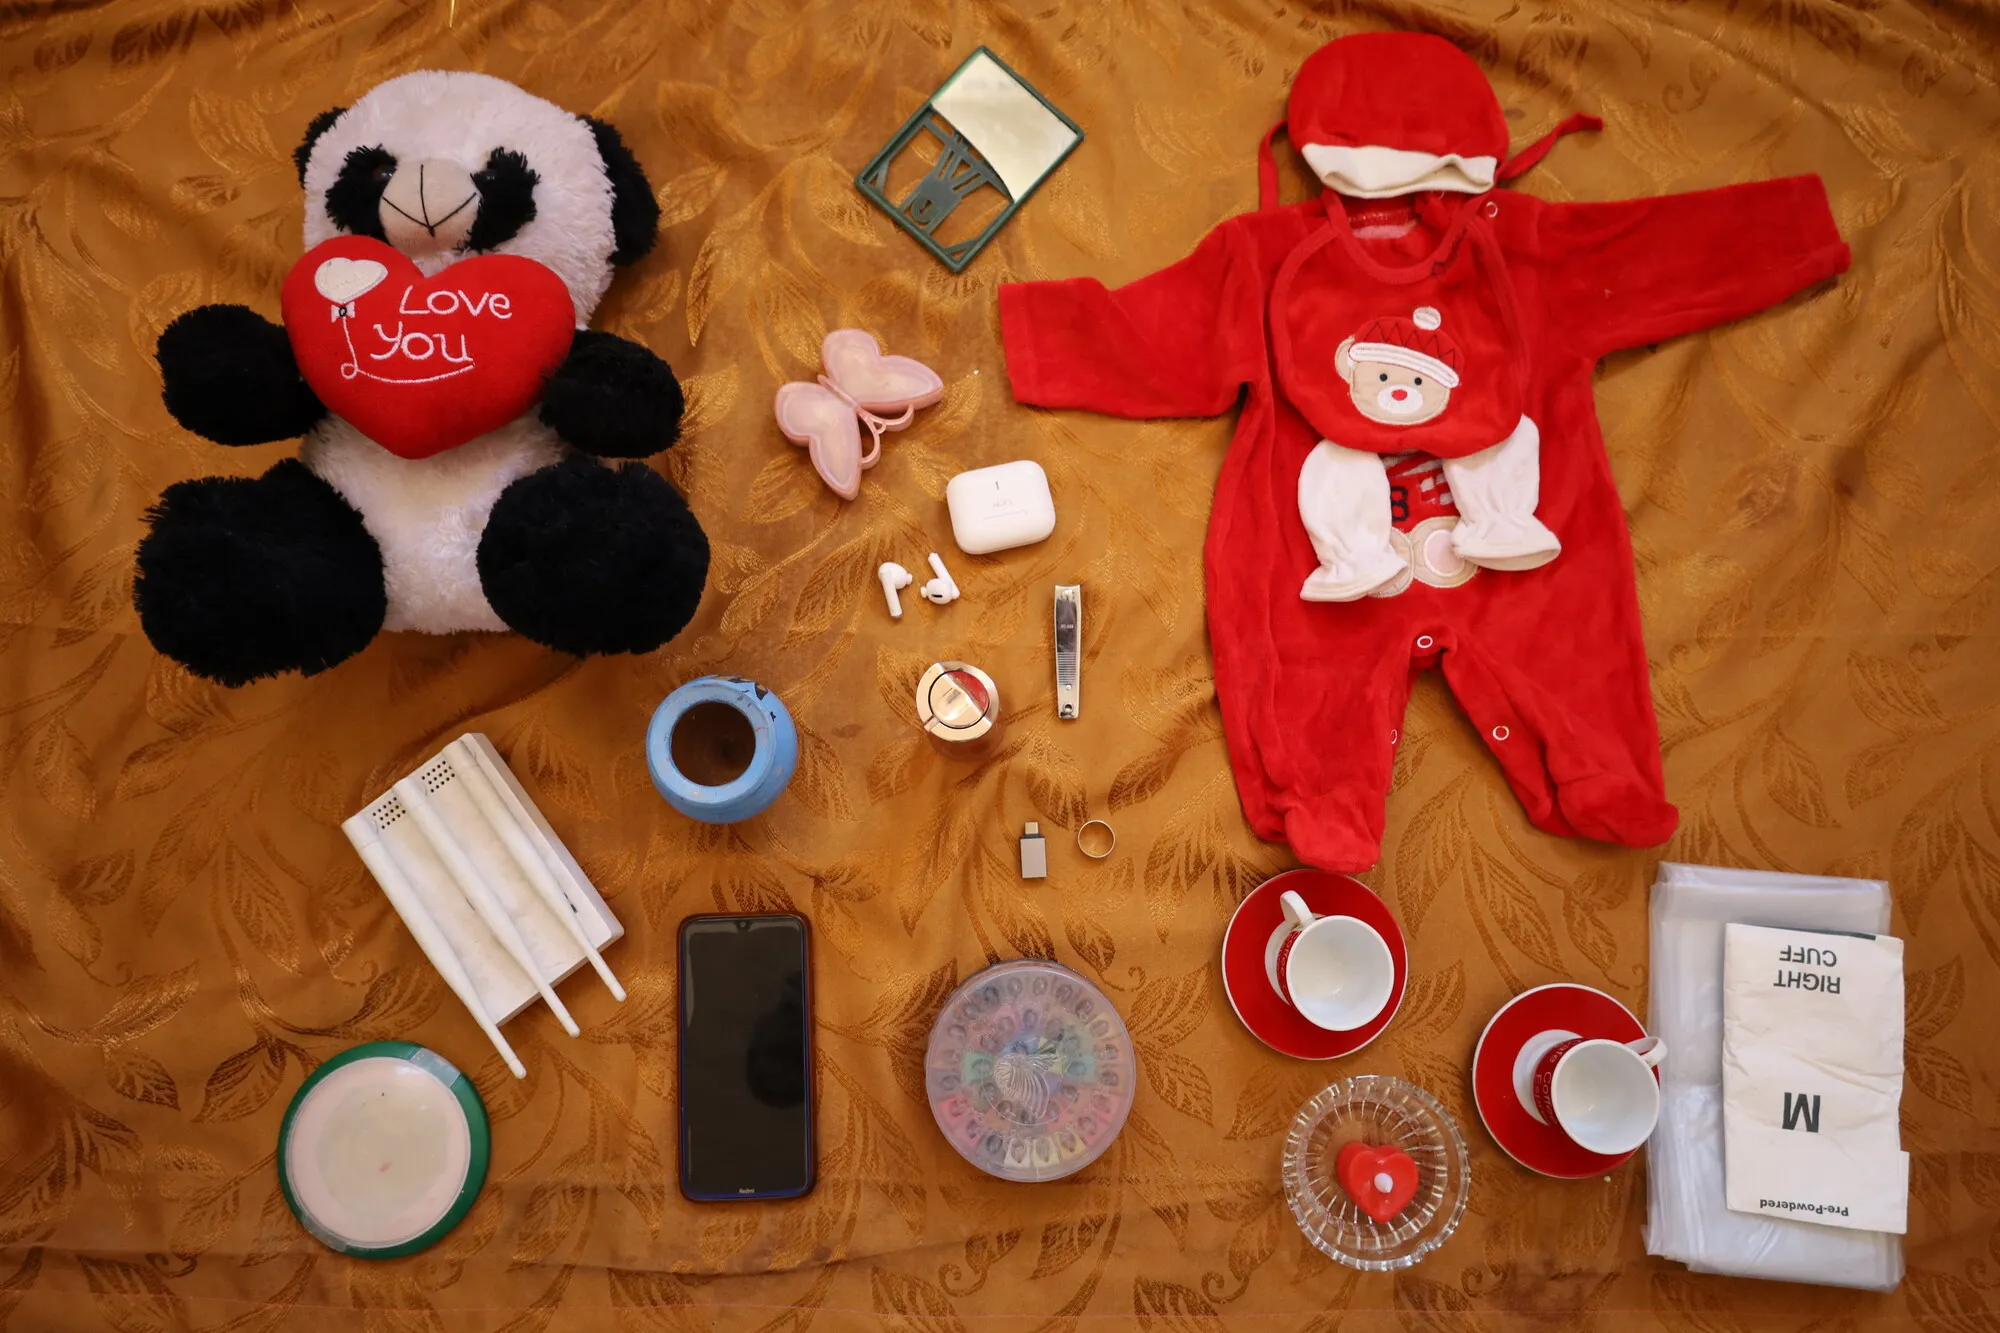 Selection of children's objects, including stuffed panda, baby clothes, and tea set.